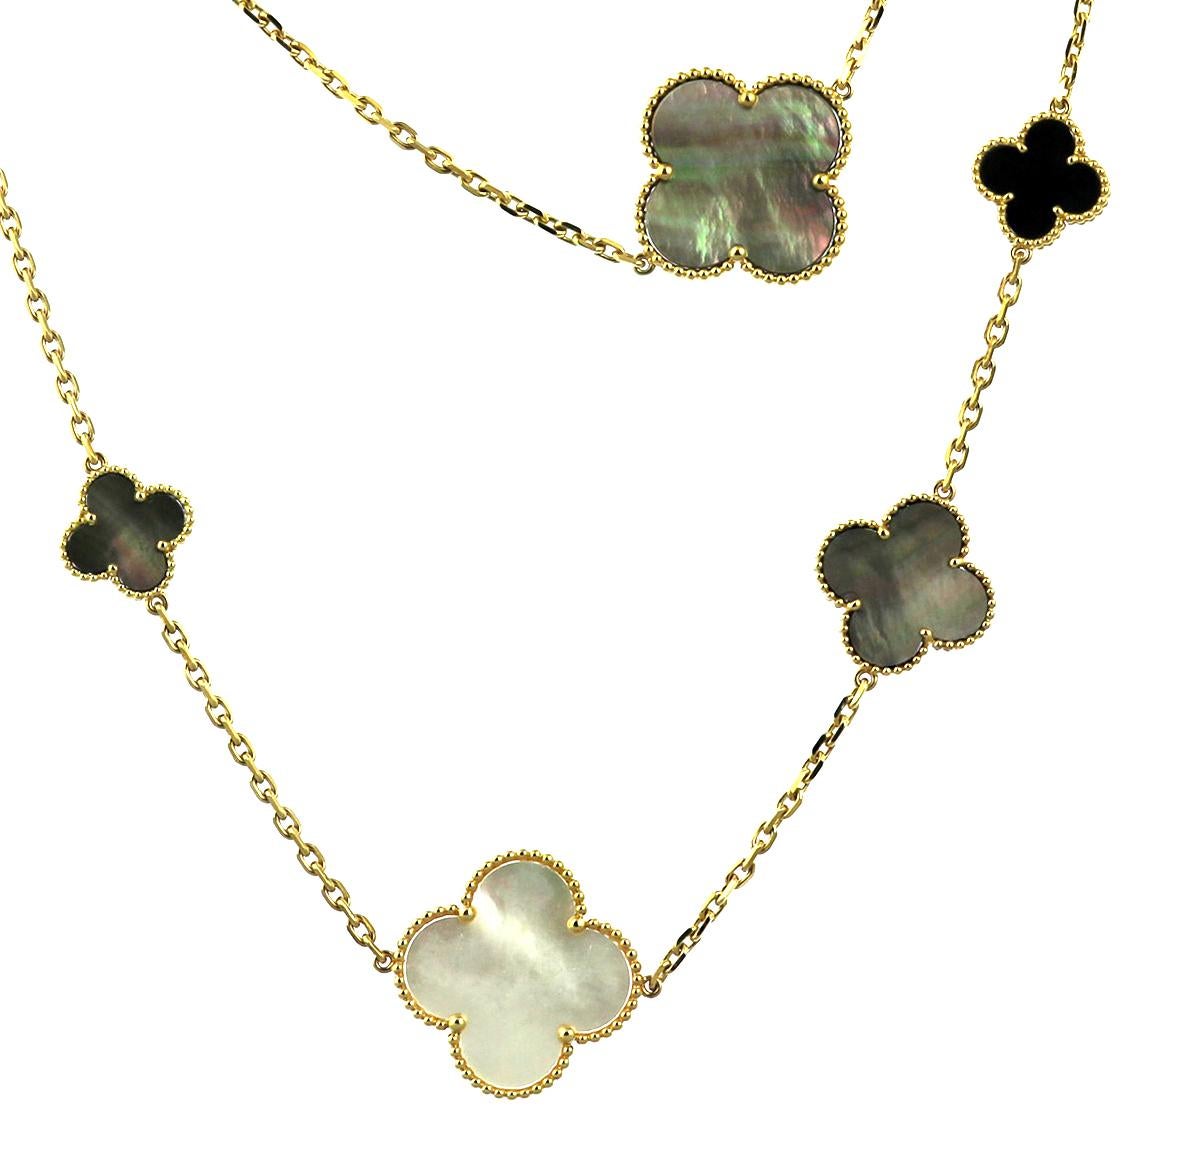 Retro Van Cleef & Arpels, Magic Alhambra Long Necklace, 16 Motifs, Mother of Pearl